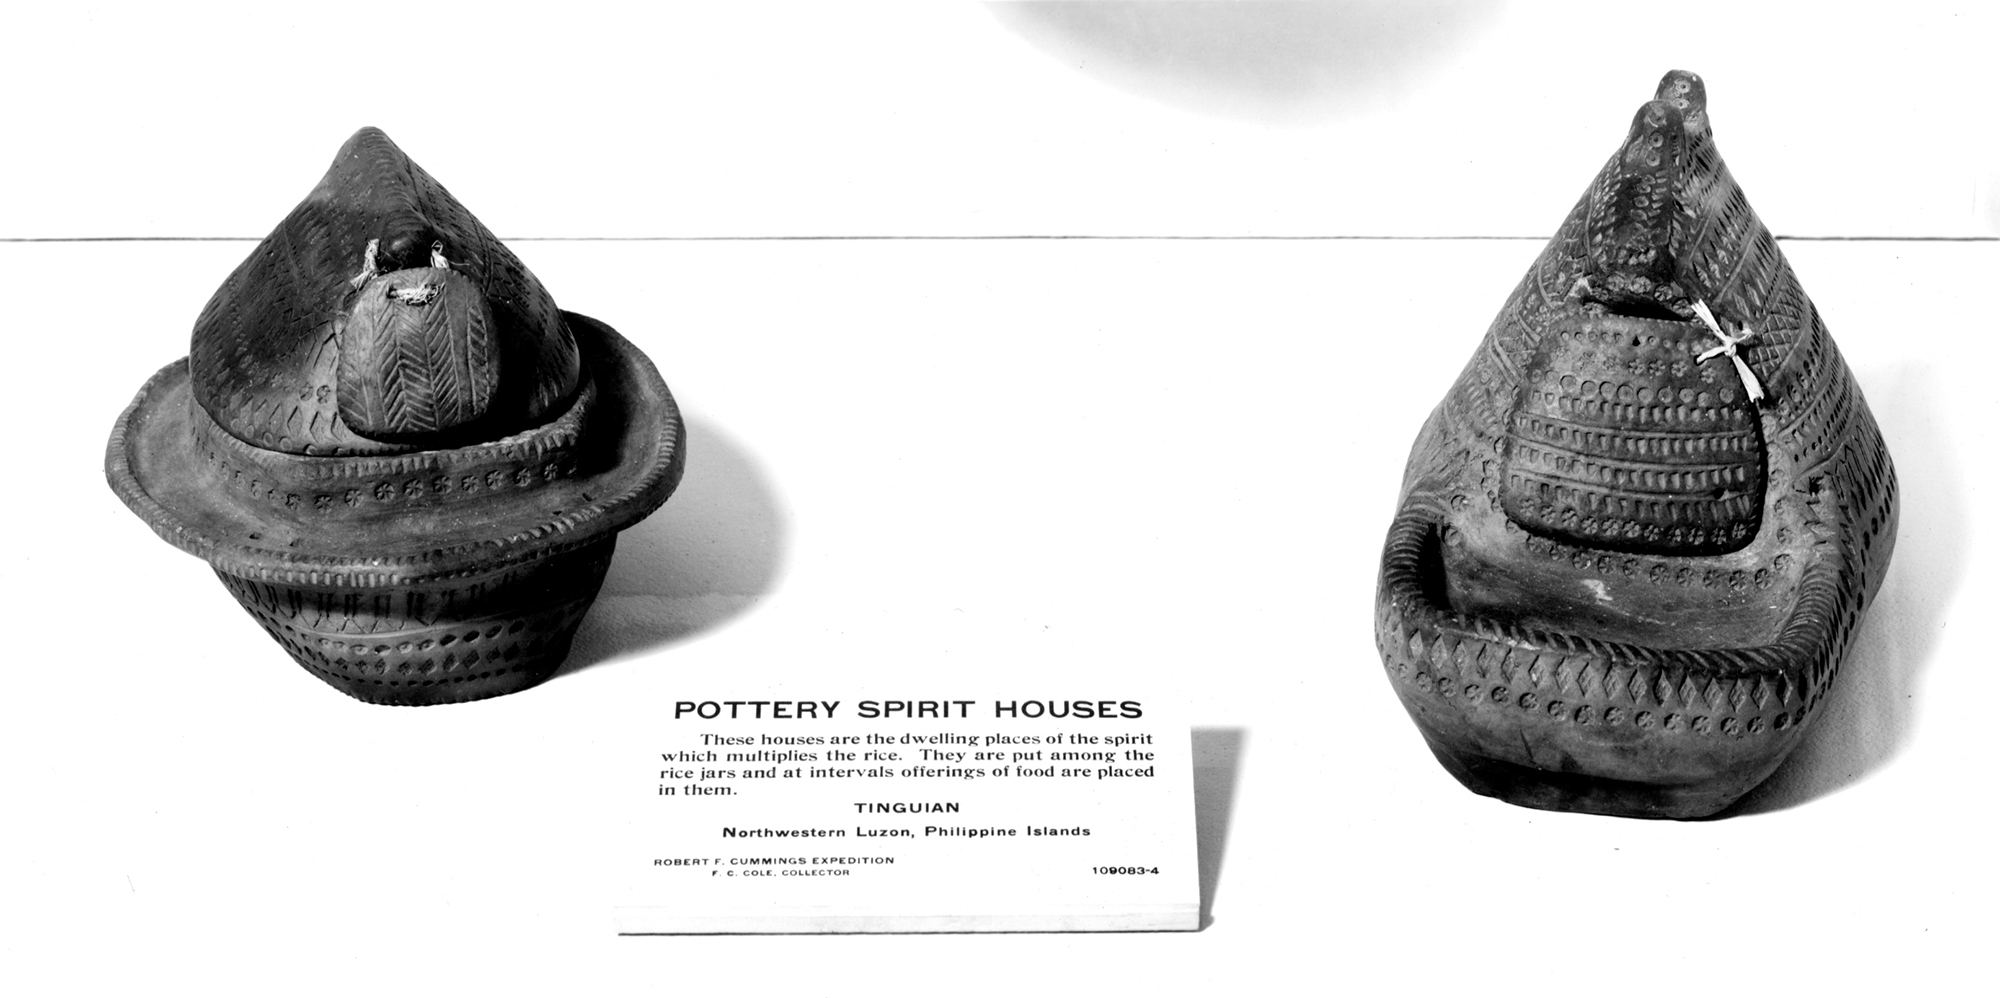 Pottery spirit house. Shown on exhibit with text label visible. 